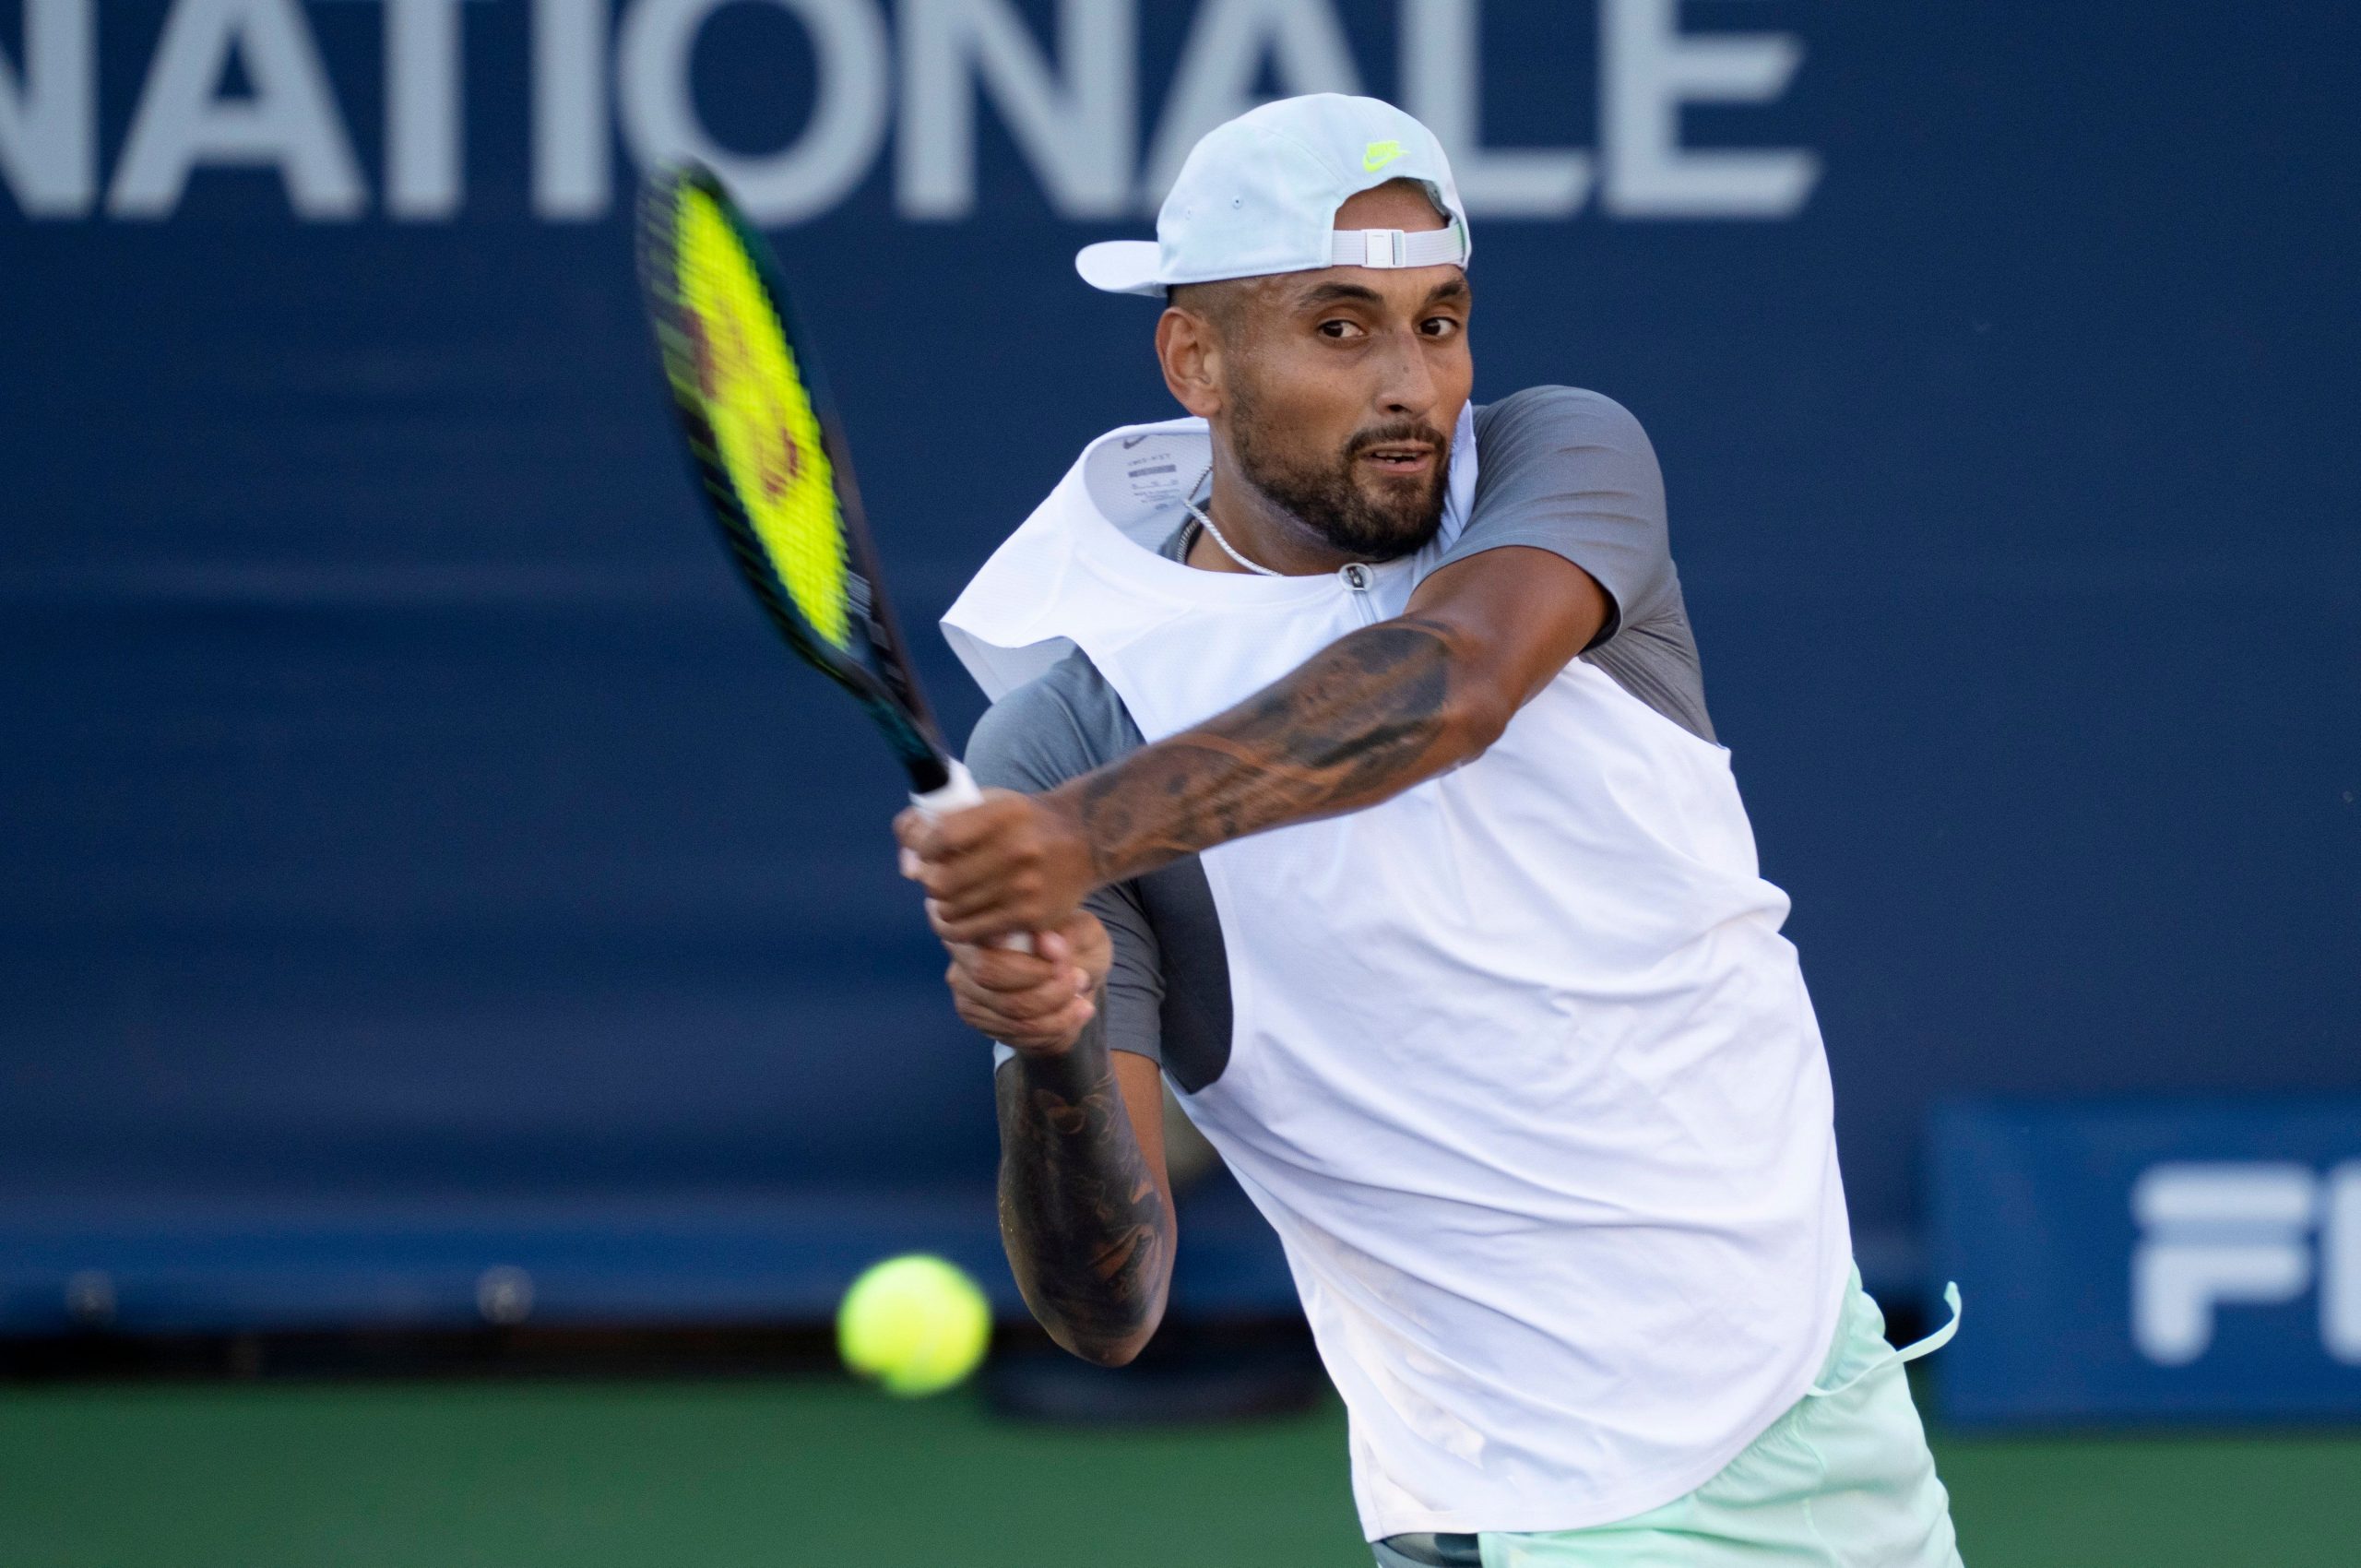 US Open: Why was Nick Kyrgios fined after his quarterfinal defeat?